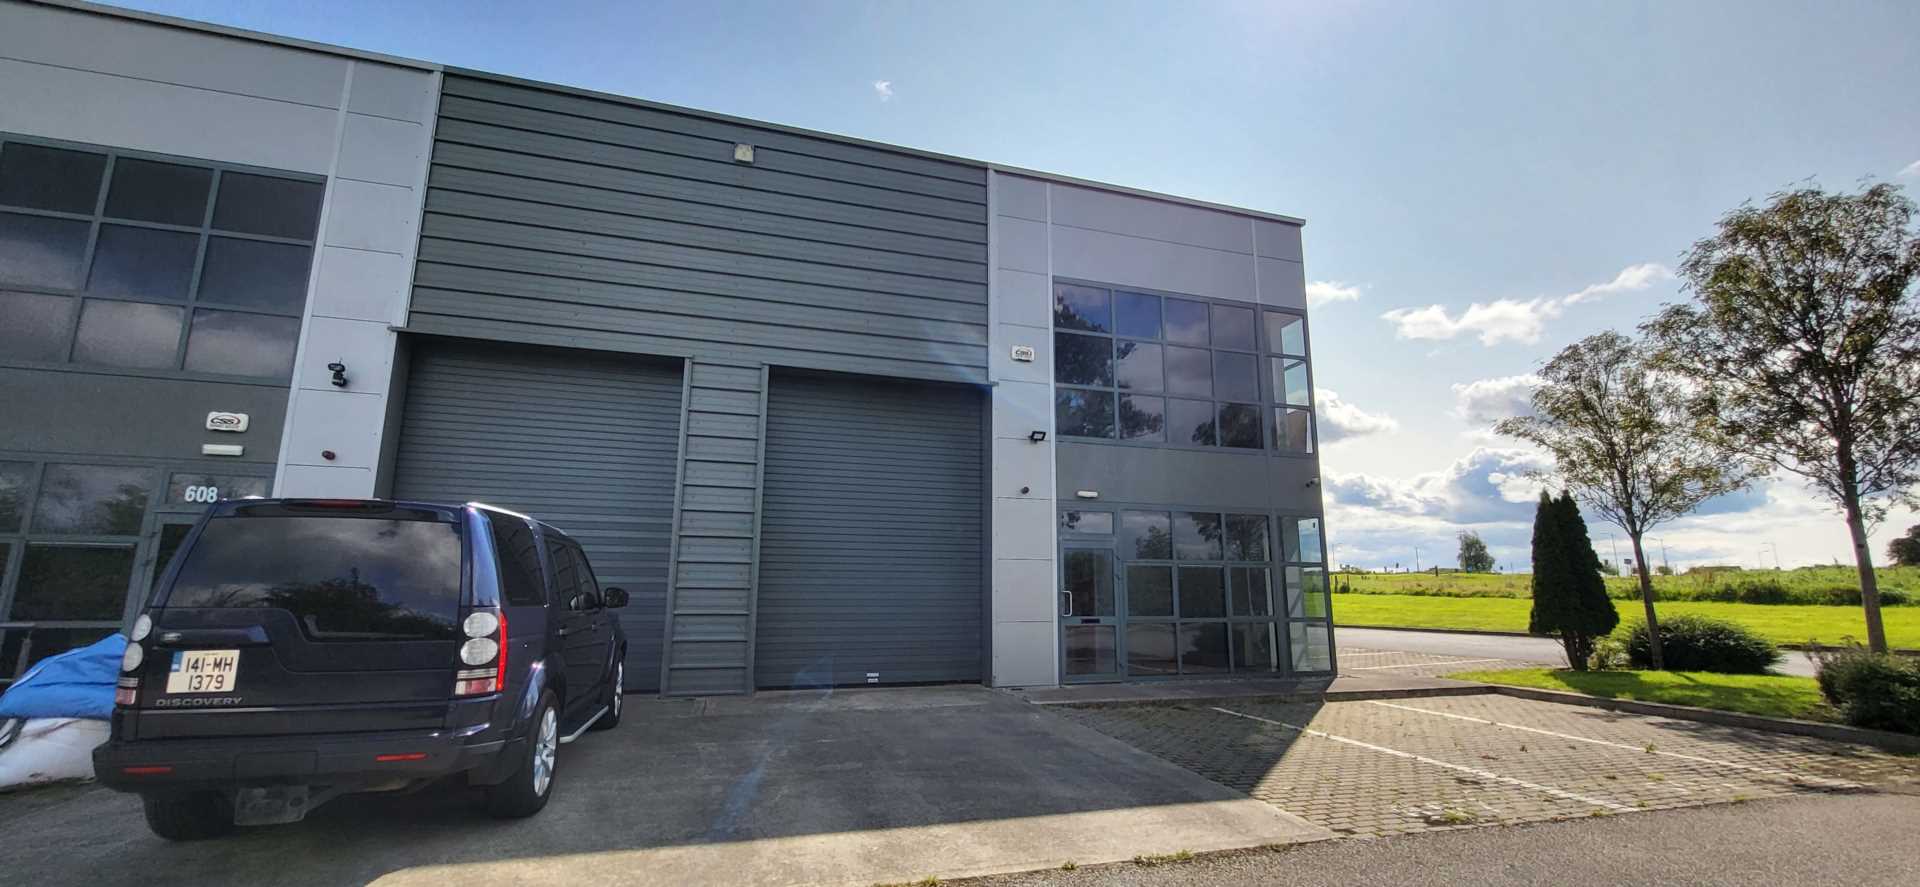 Unit 607 Edenderry Business Campus, Edenderry, Co. Offaly,